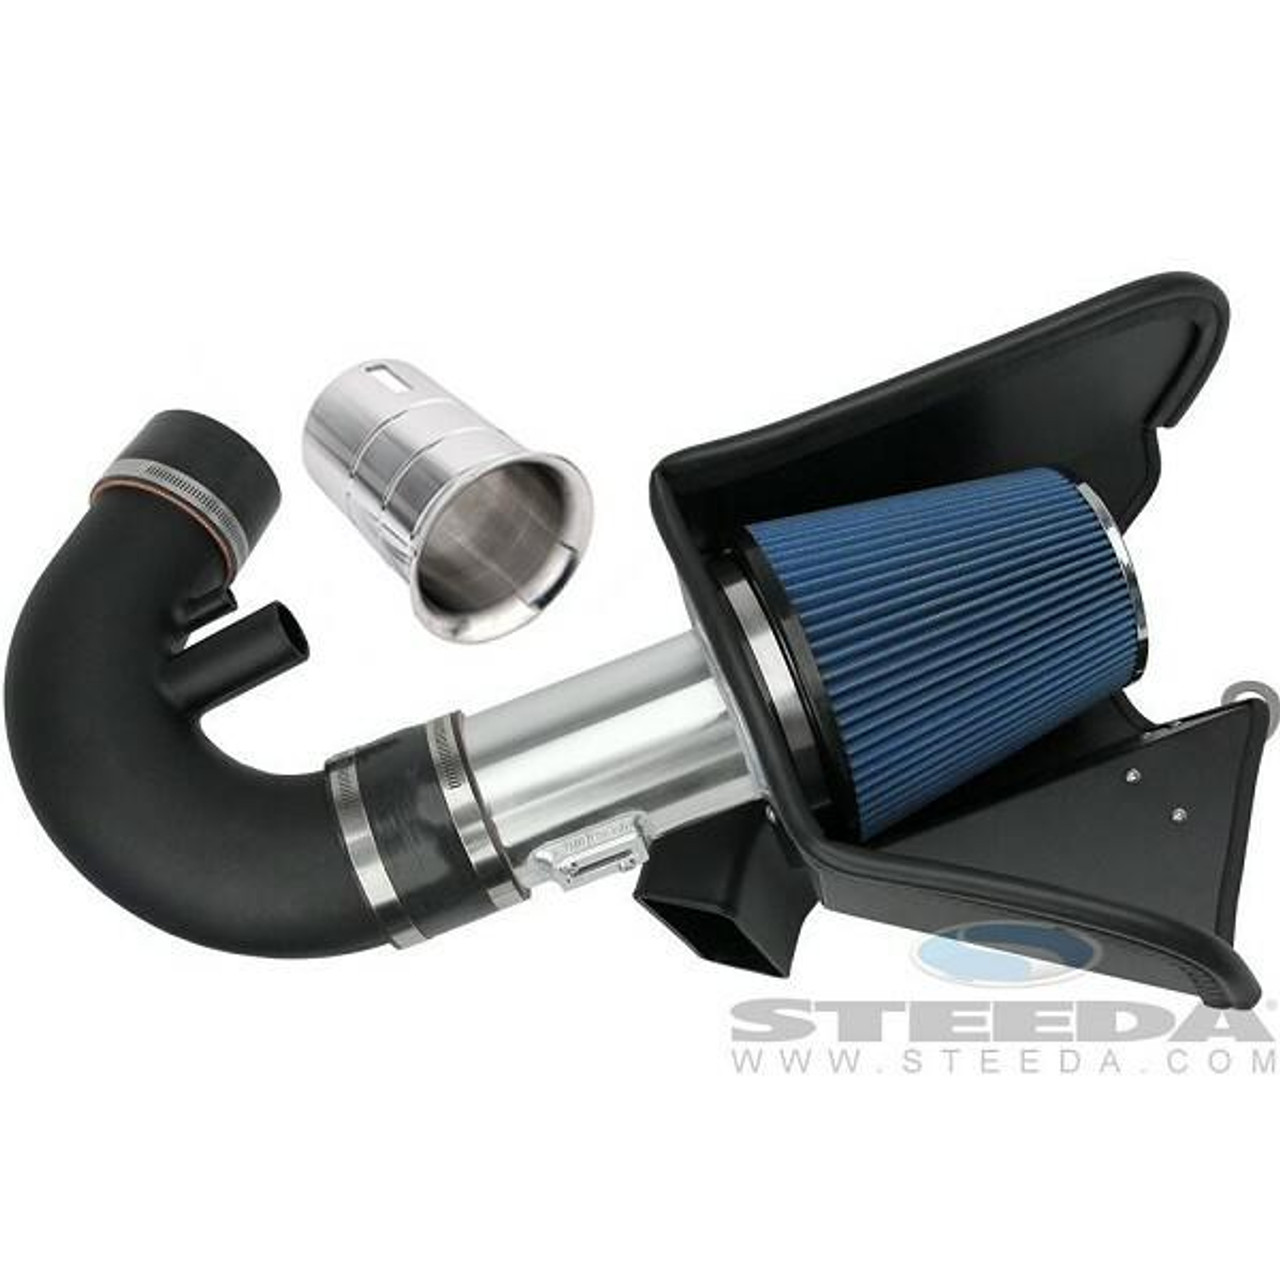 Steeda Steeda ProFlow Mustang Cold Air Intake Kit - Automatic GT, 11-14, No tune required